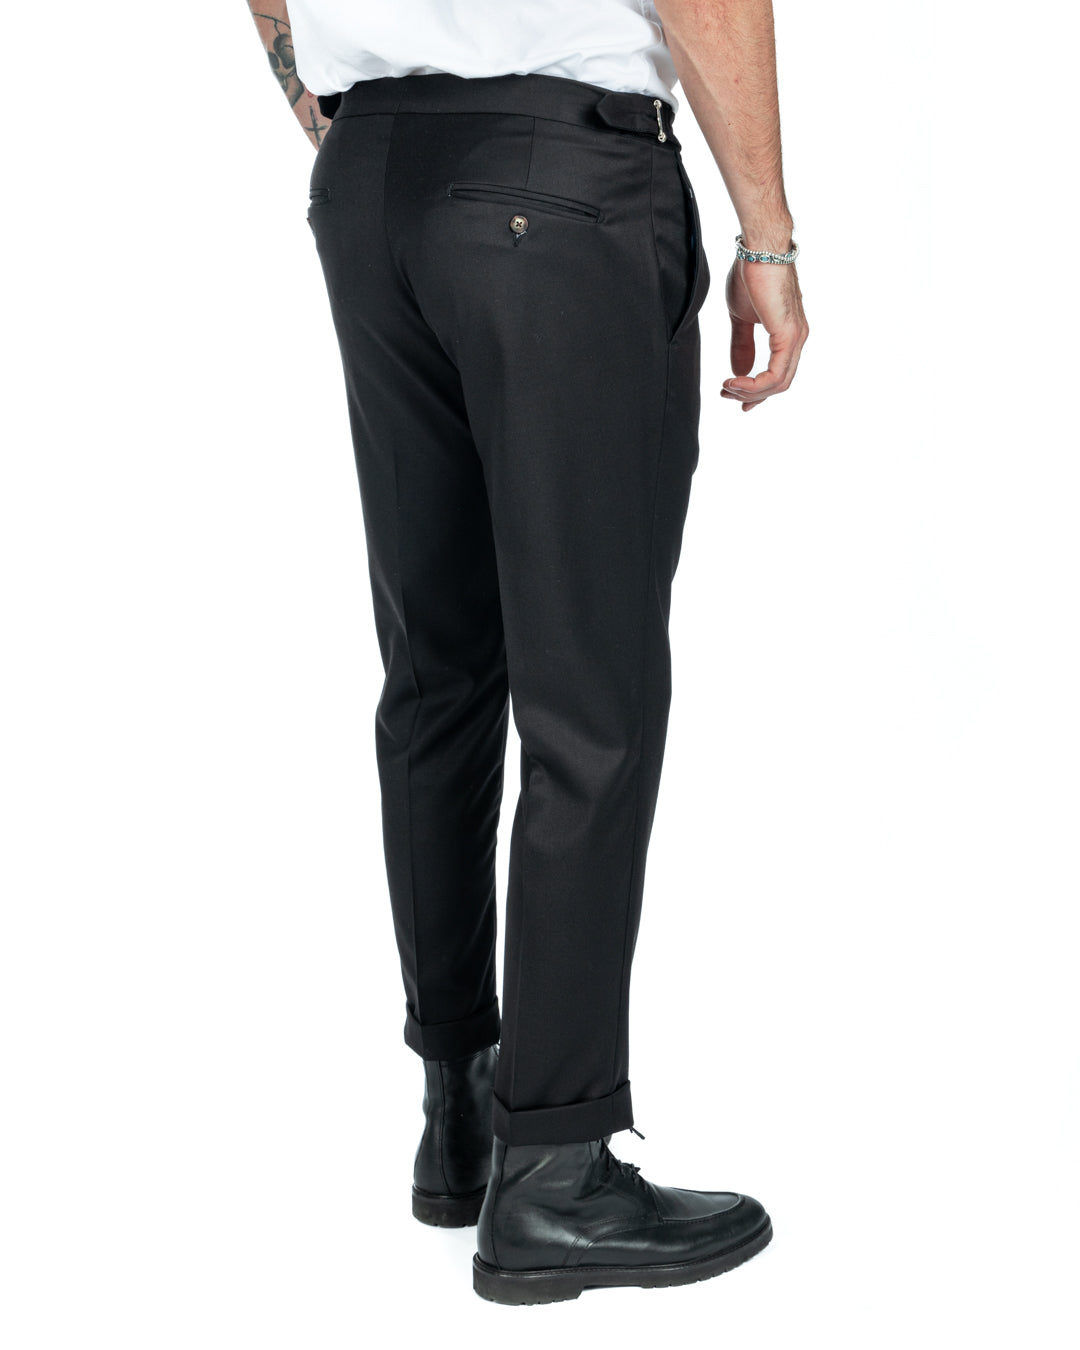 Otranto - black trousers with buckles and pleats